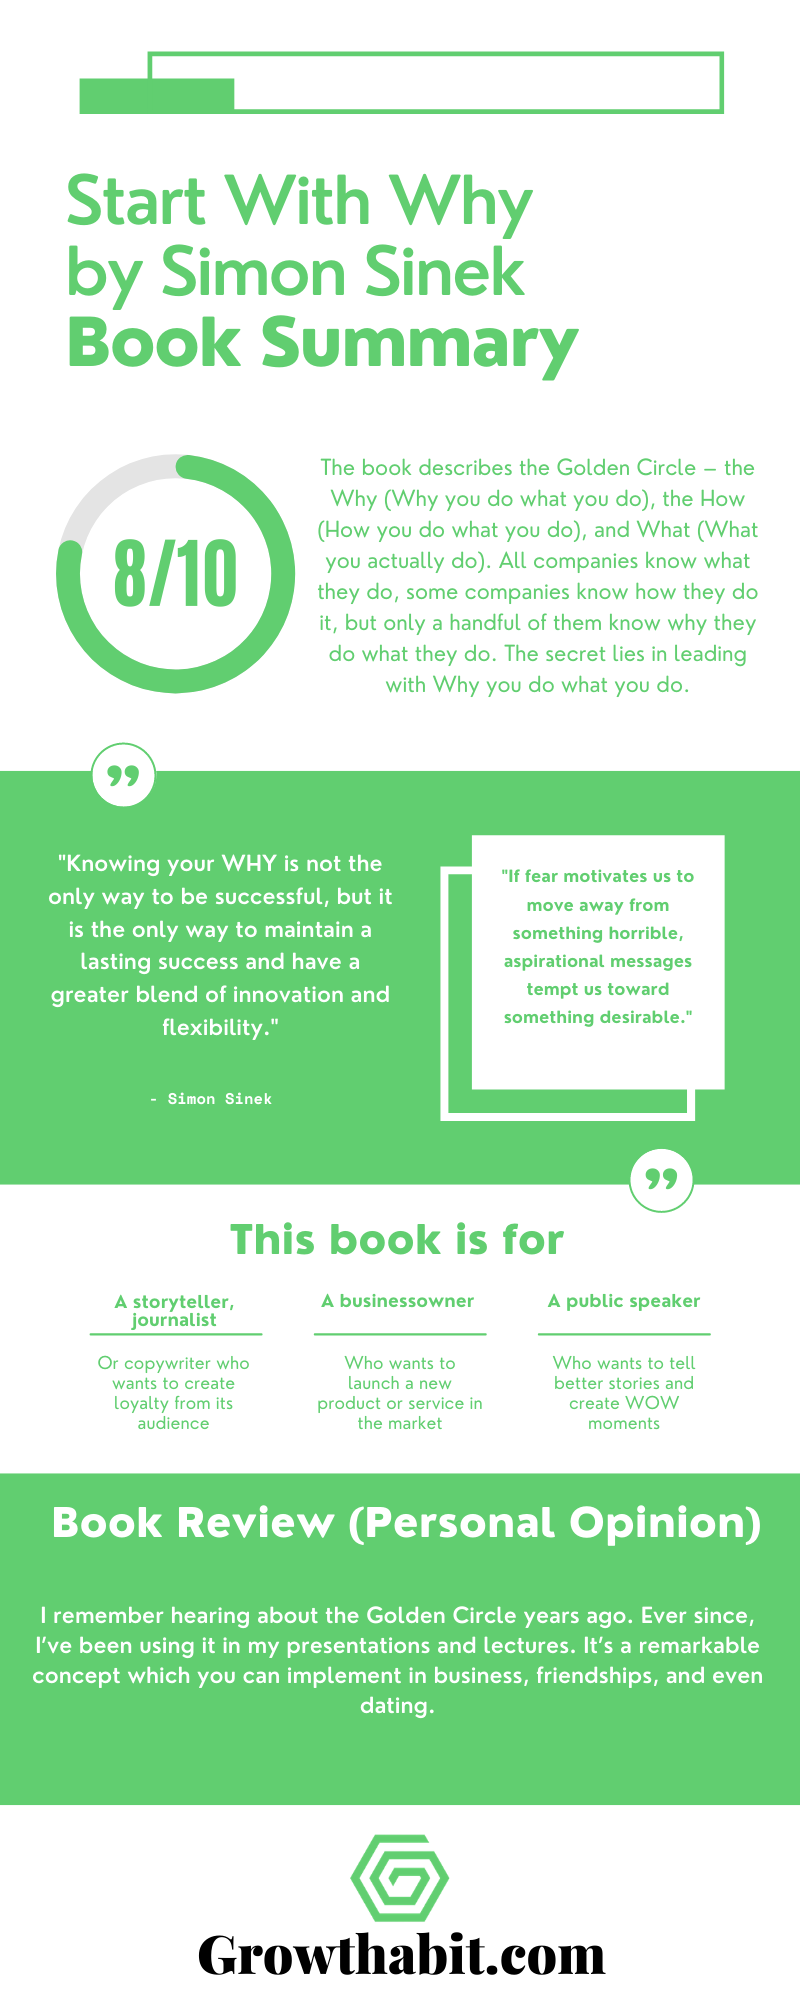 Start With Why by Simon Sinek - Book Summary Infographic